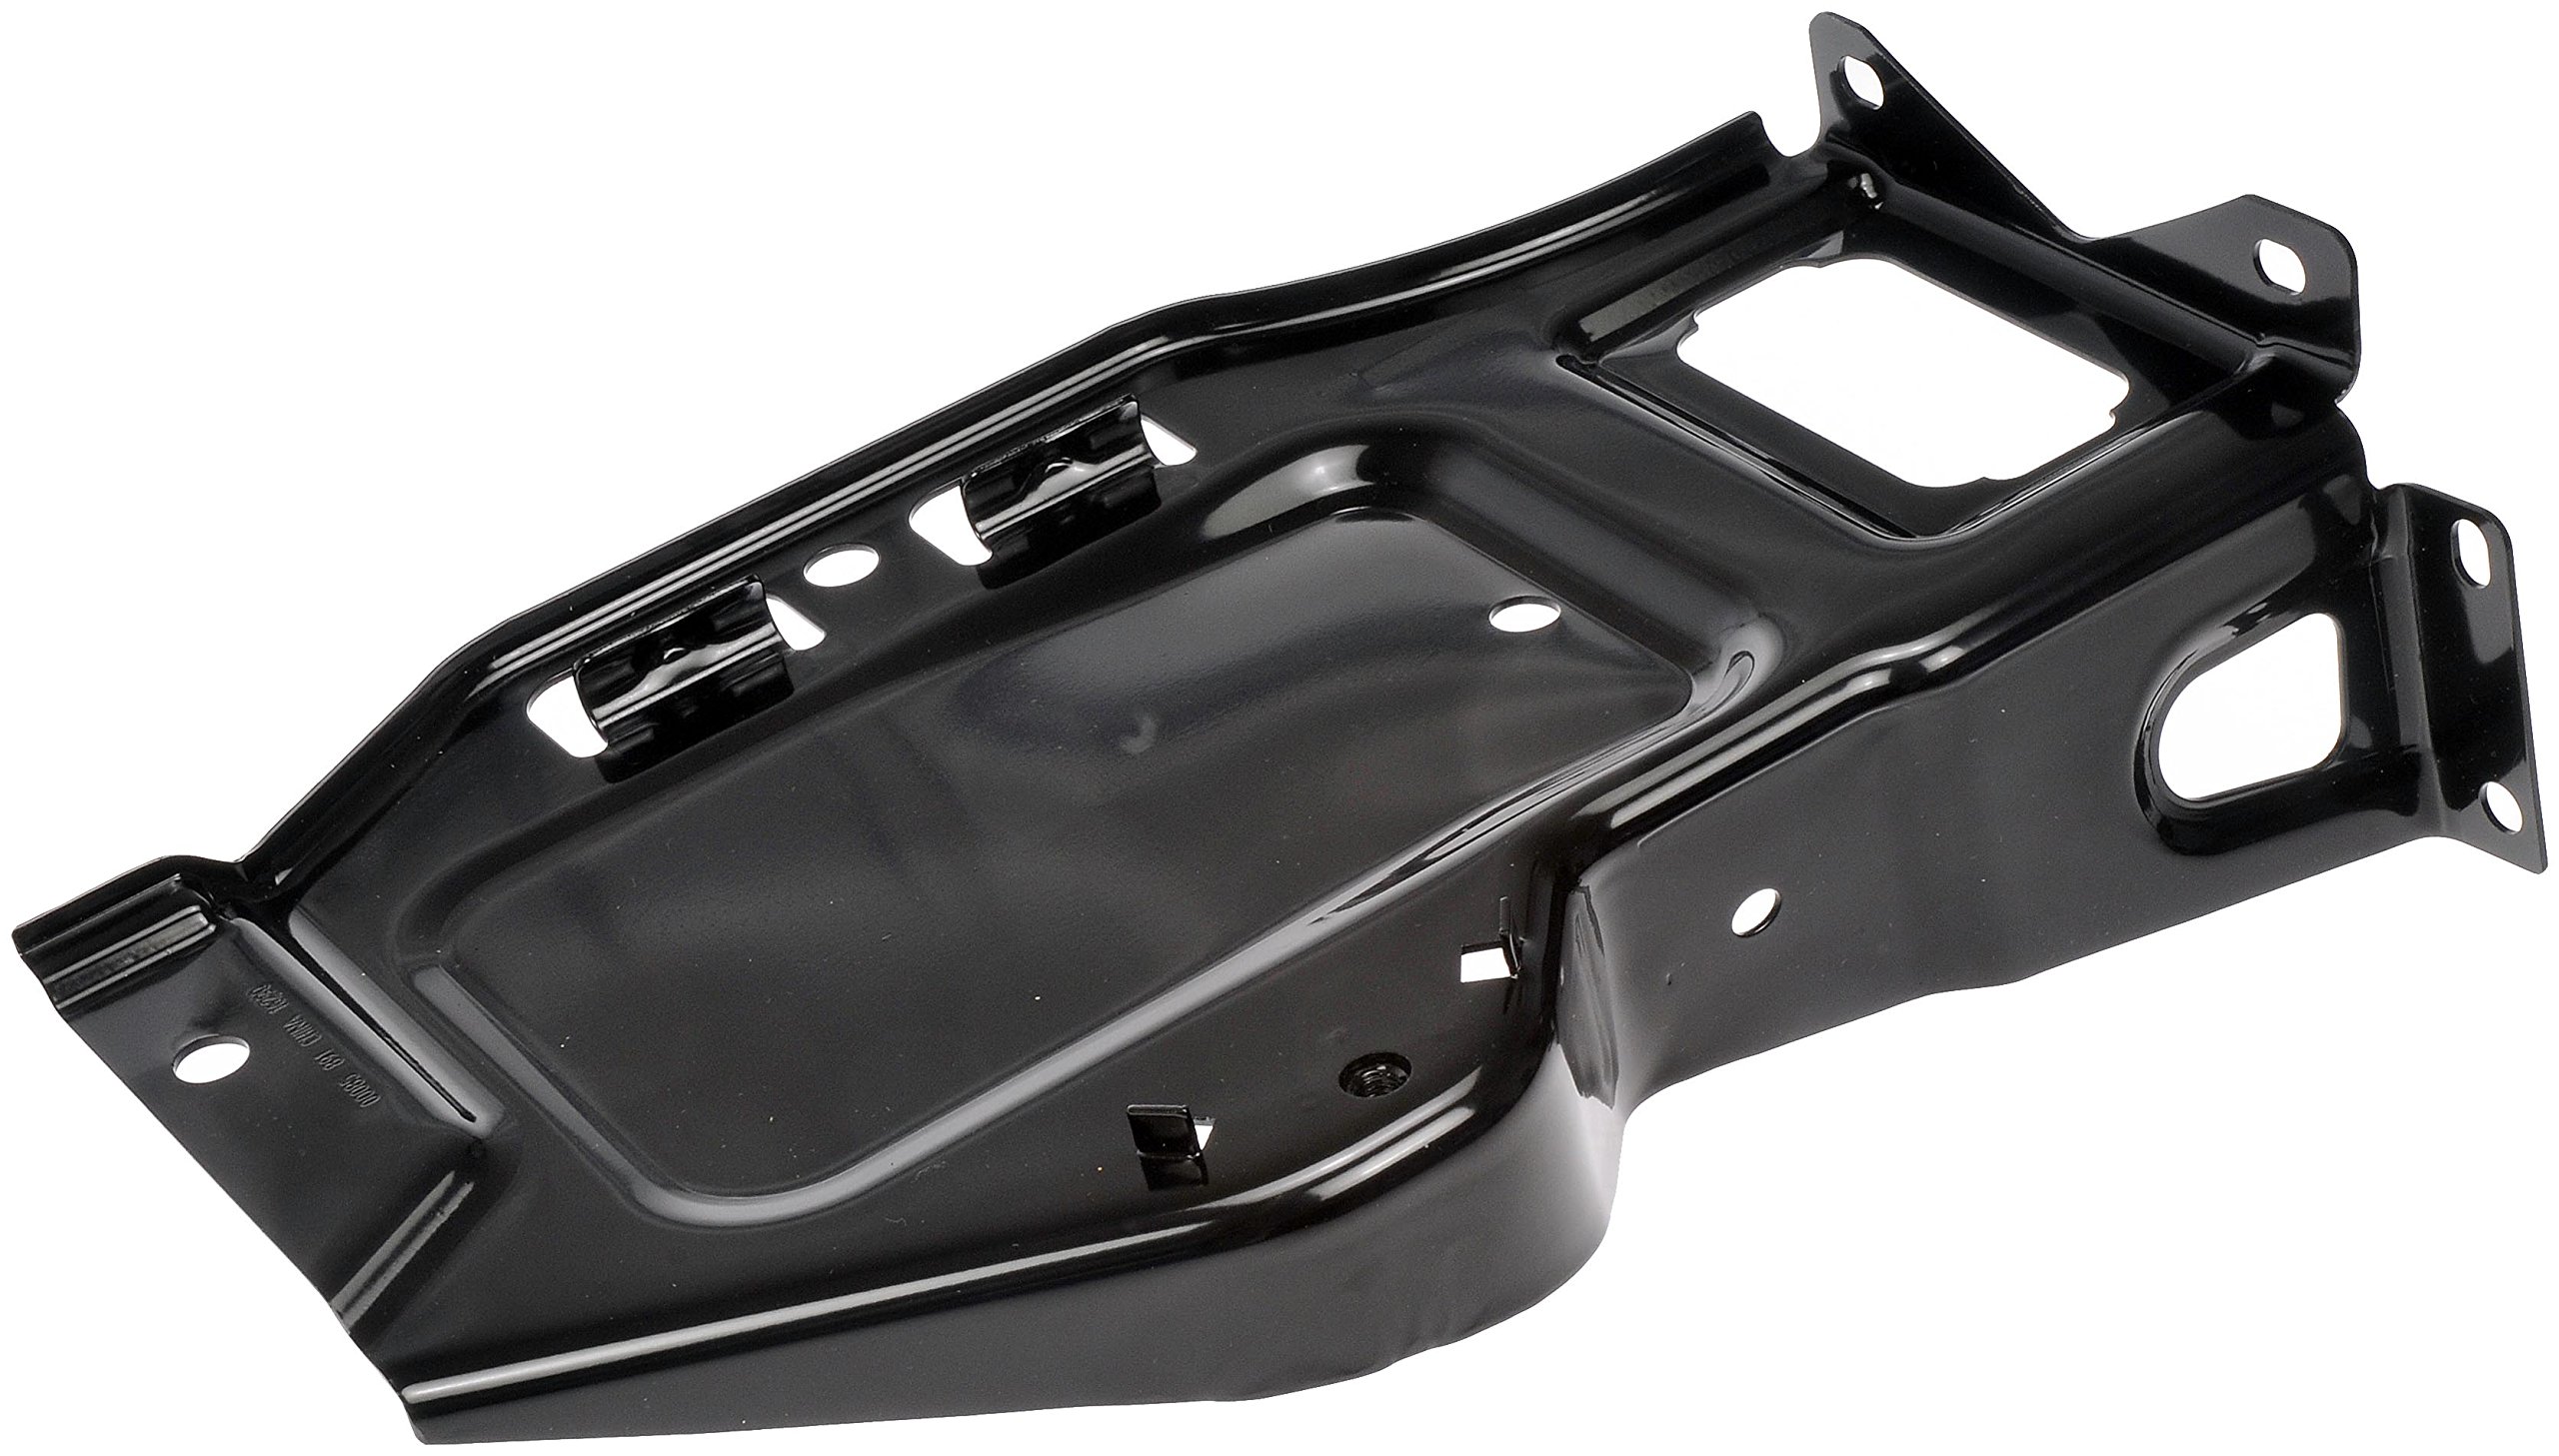 Dorman 00085 Passenger Side Battery Tray Replacement Compatible With Select Cadillac Chevrolet Gmc Models